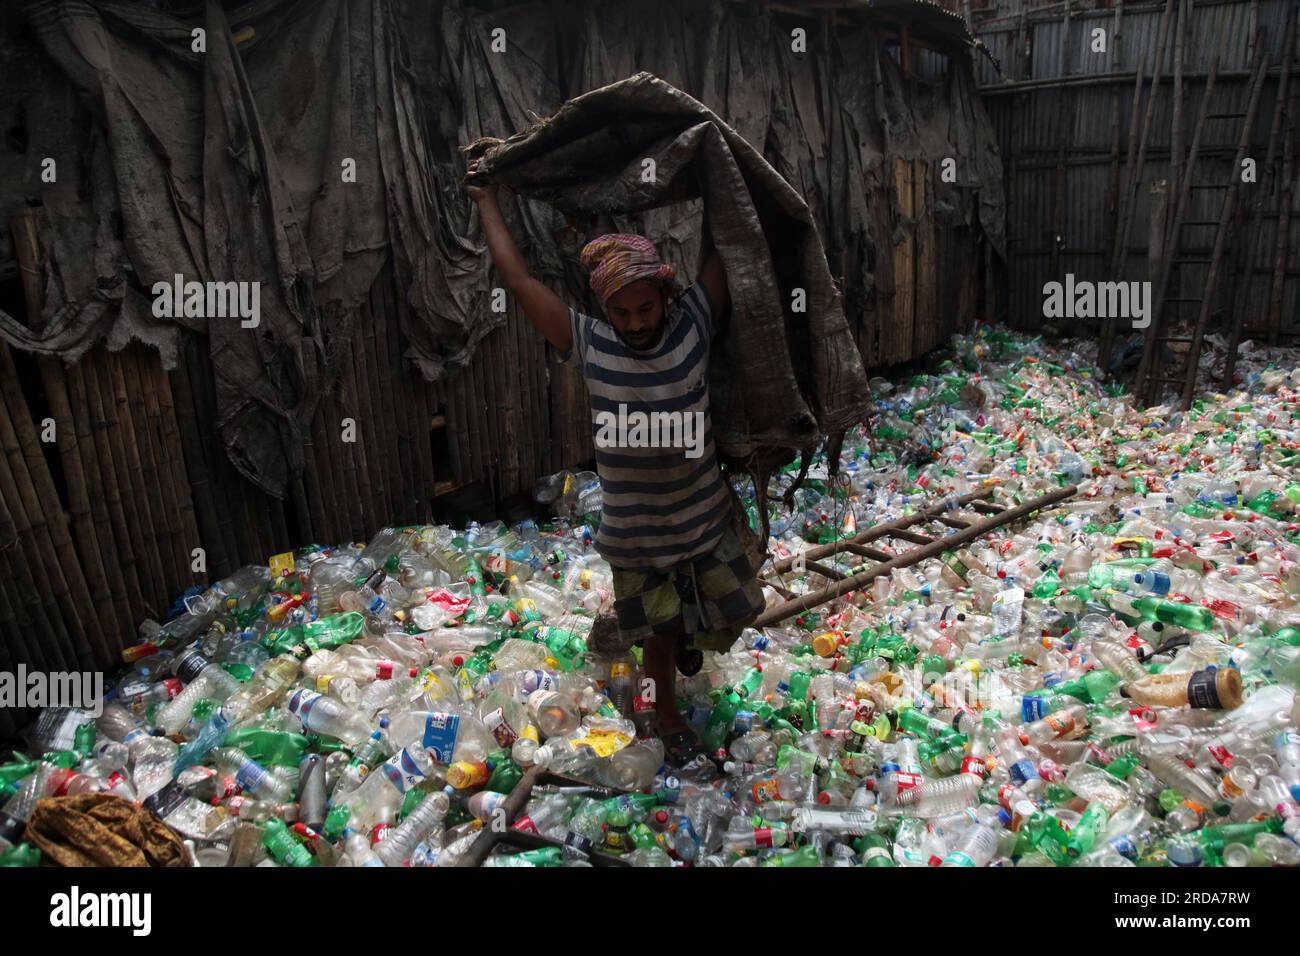 Dhaka, Dhaka, Bangladesh. 18th March, 2023. A man are working at a plastic bottle recycling factory. photo was taken kmarangichar beribadgh. Nazmul is Stock Photo